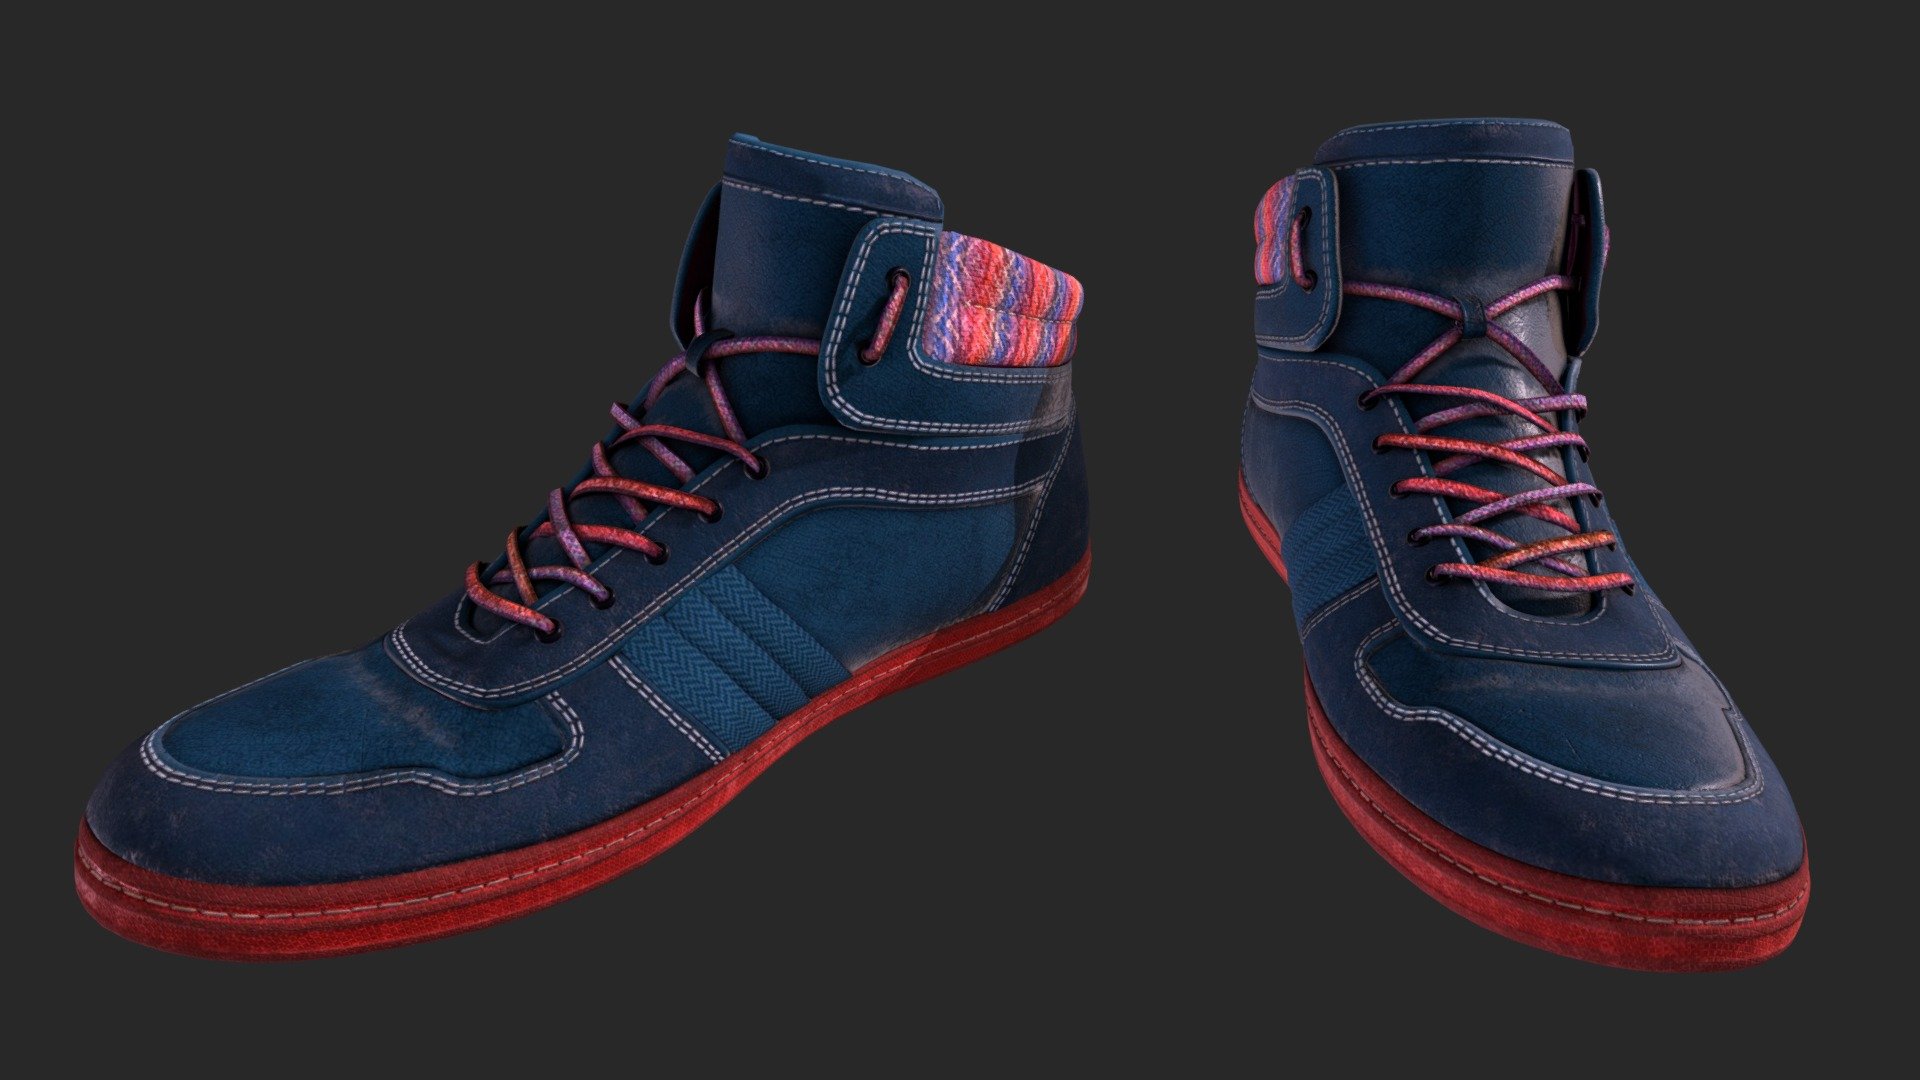 For the Sketchfab Texturing Challenge I decided to create the kind of shoes that I would wear.
I made two versions of them, the new version “New Blue Shoes